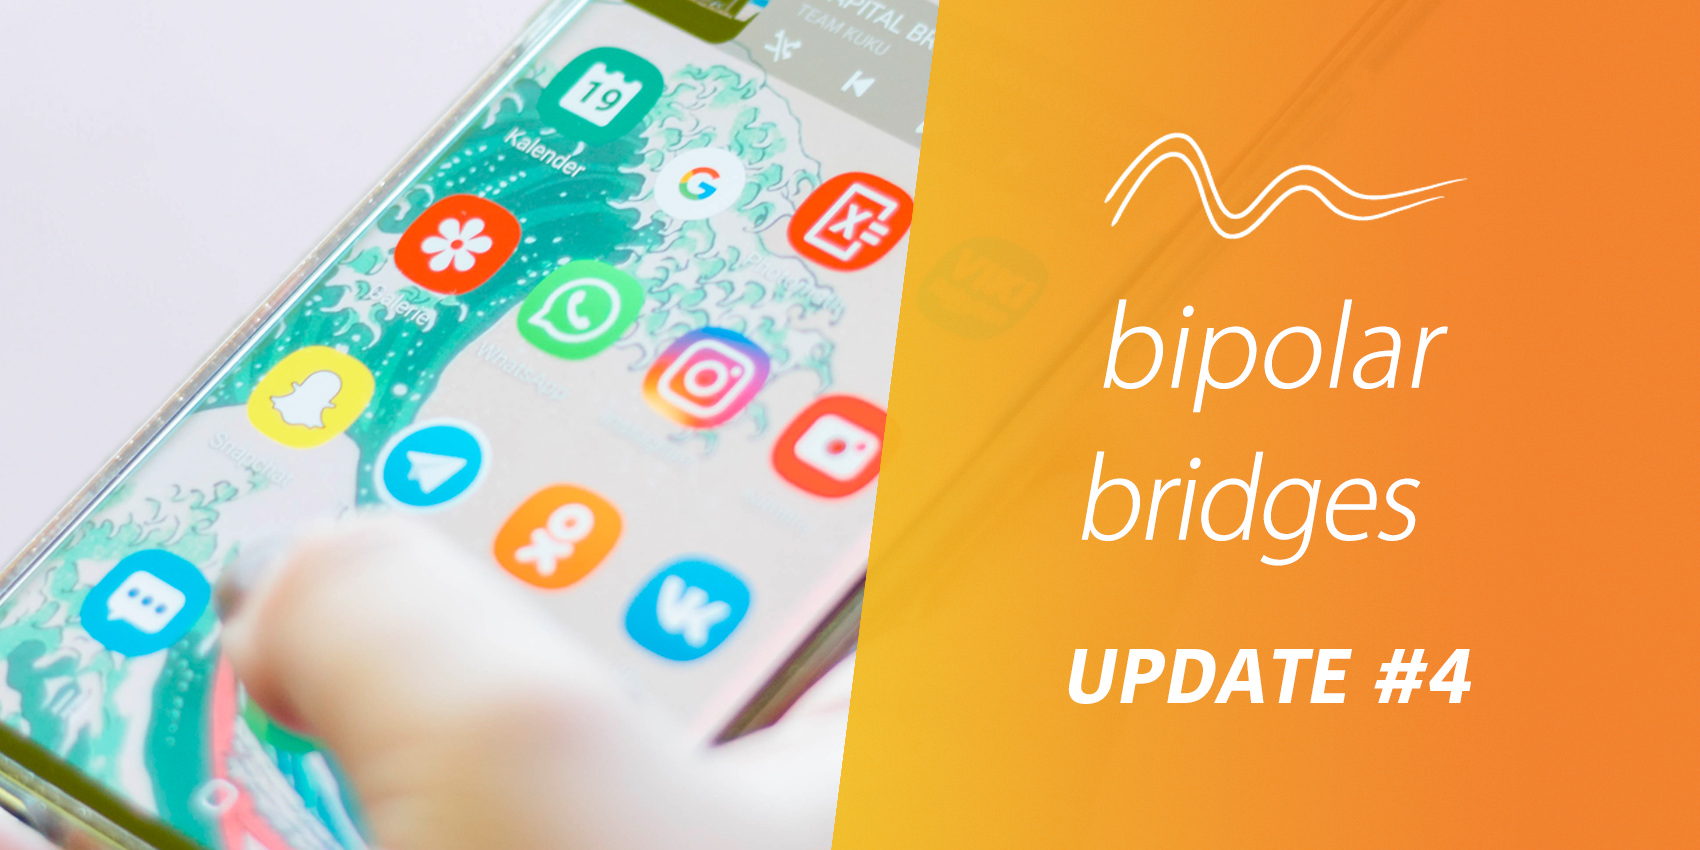 Bipolar Bridges Update 4: “There’s an app for that!”